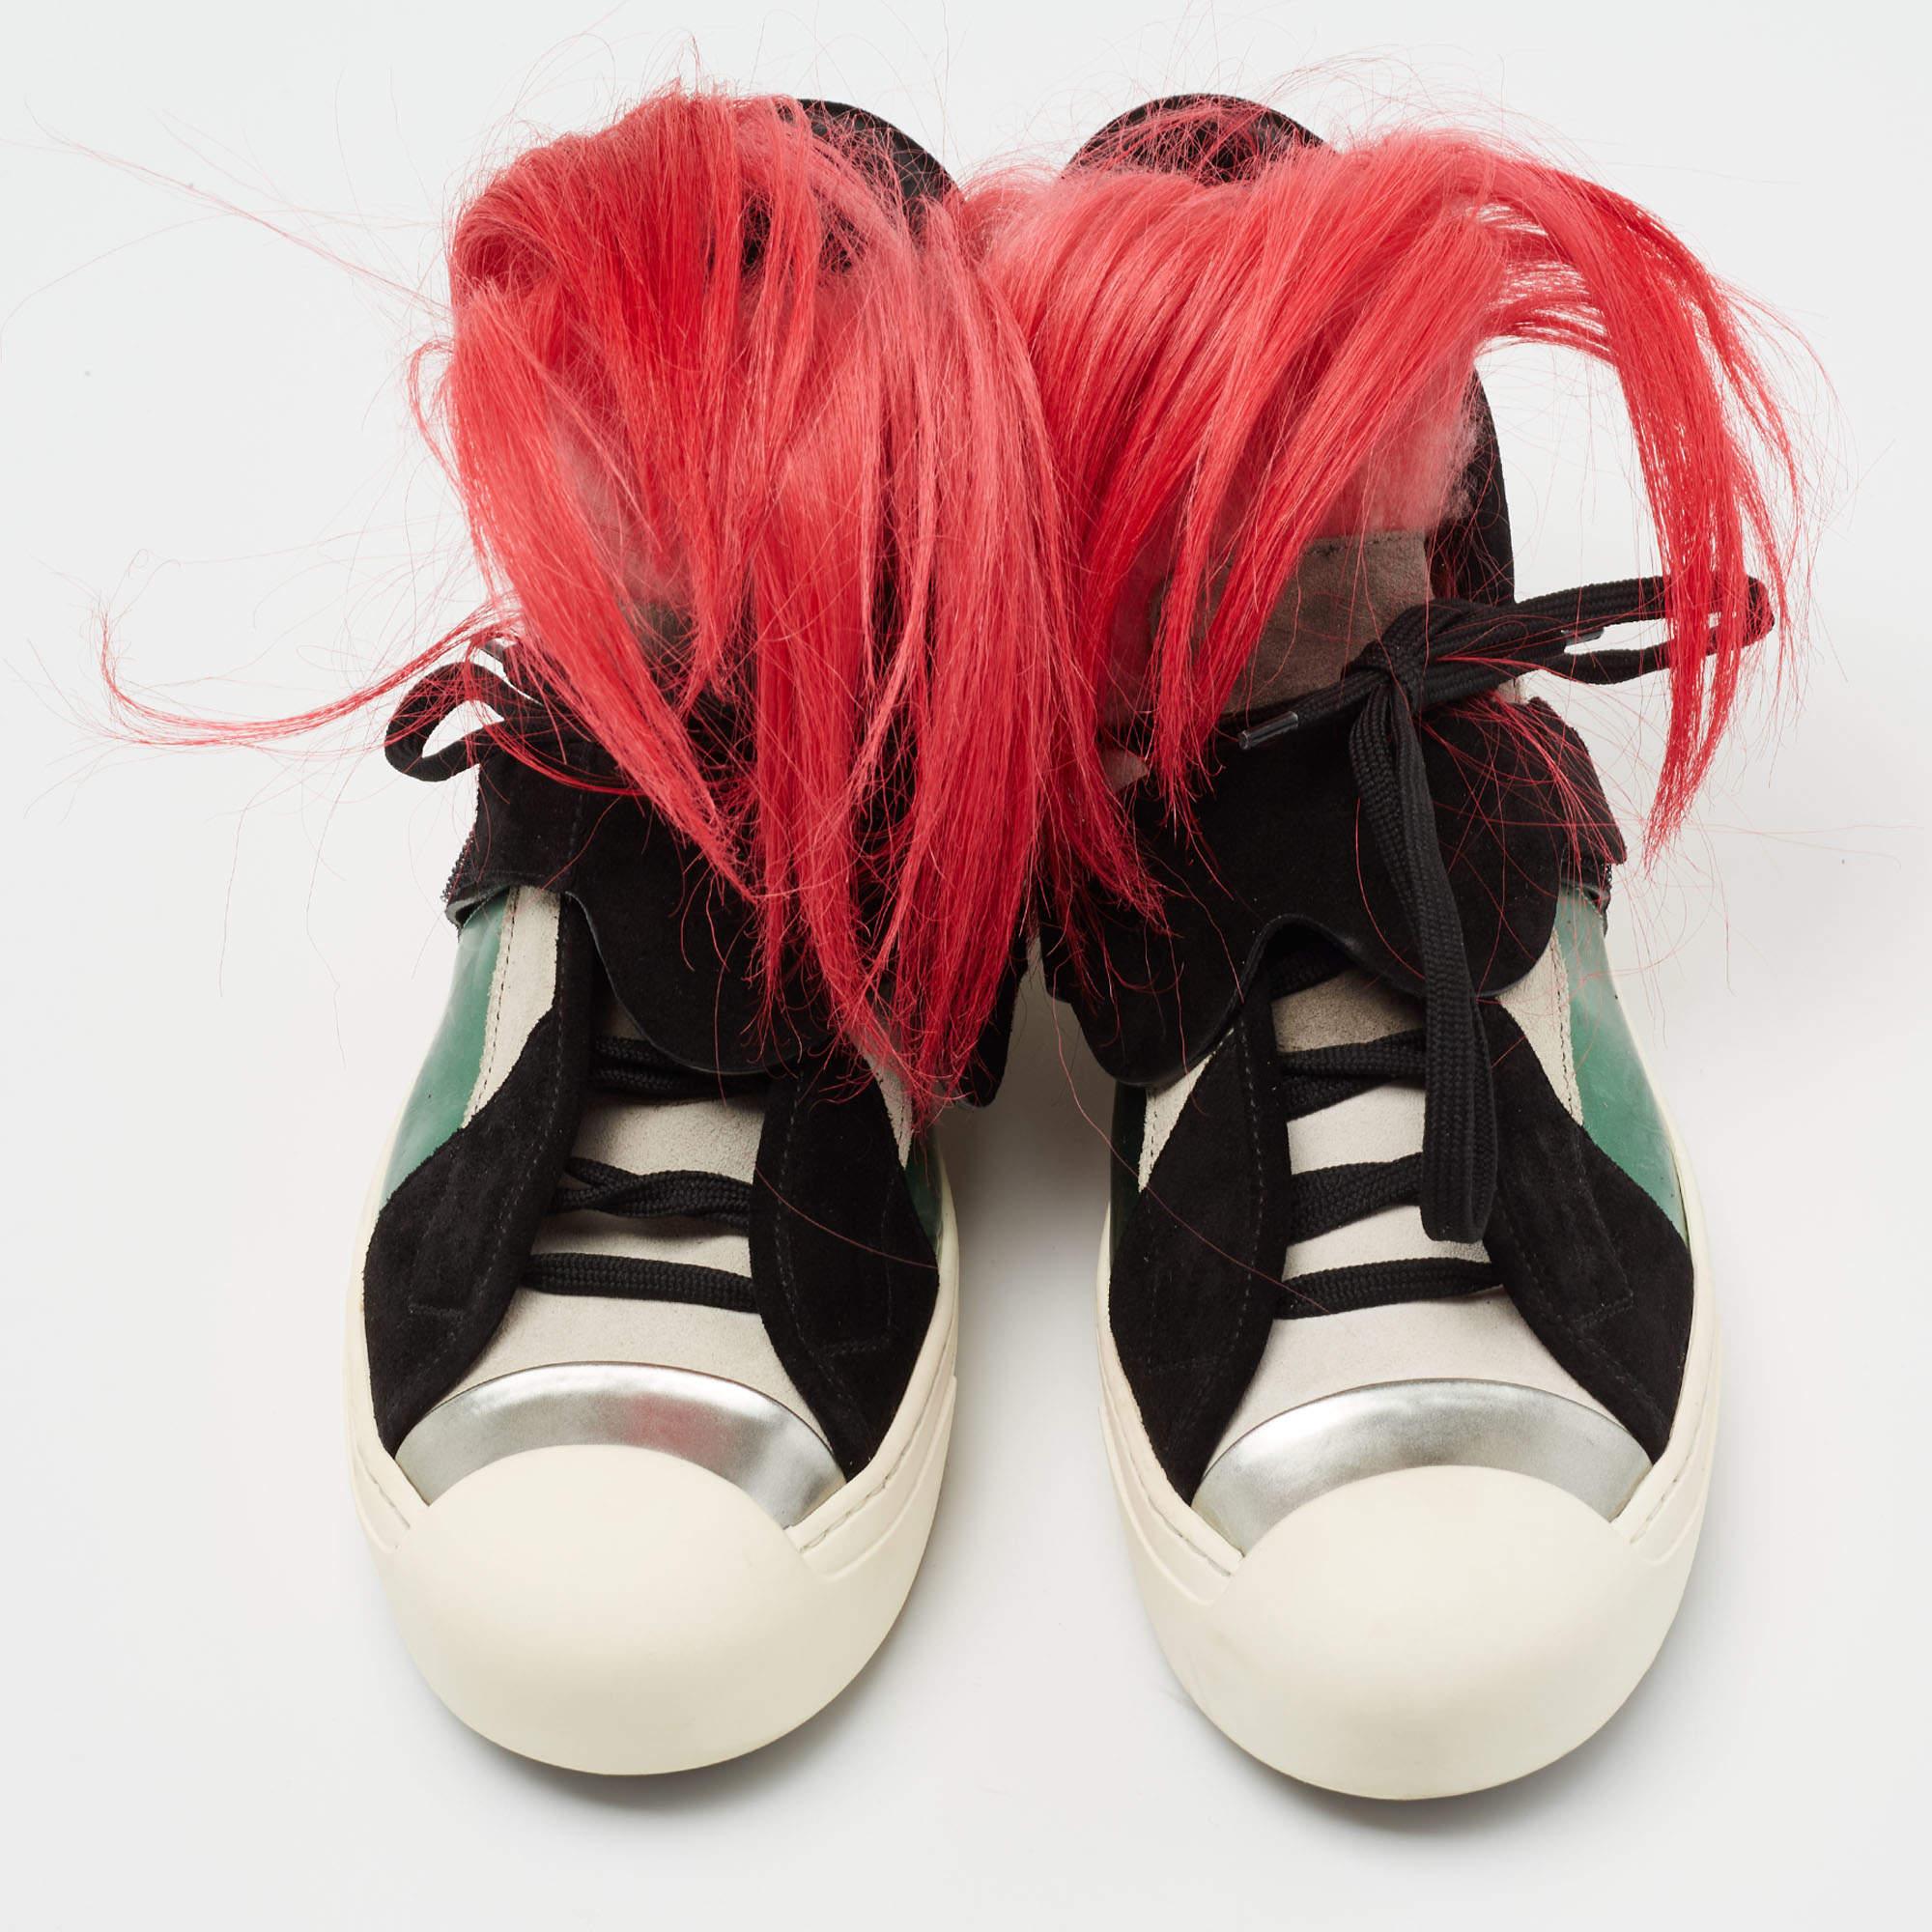 Modeled on fashion icon Karl Lagerfeld, the Karlito range of designs from Fendi is fun and full of character. These sneakers come crafted from suede and leather with fox fur detailing on the laced uppers. They also feature 